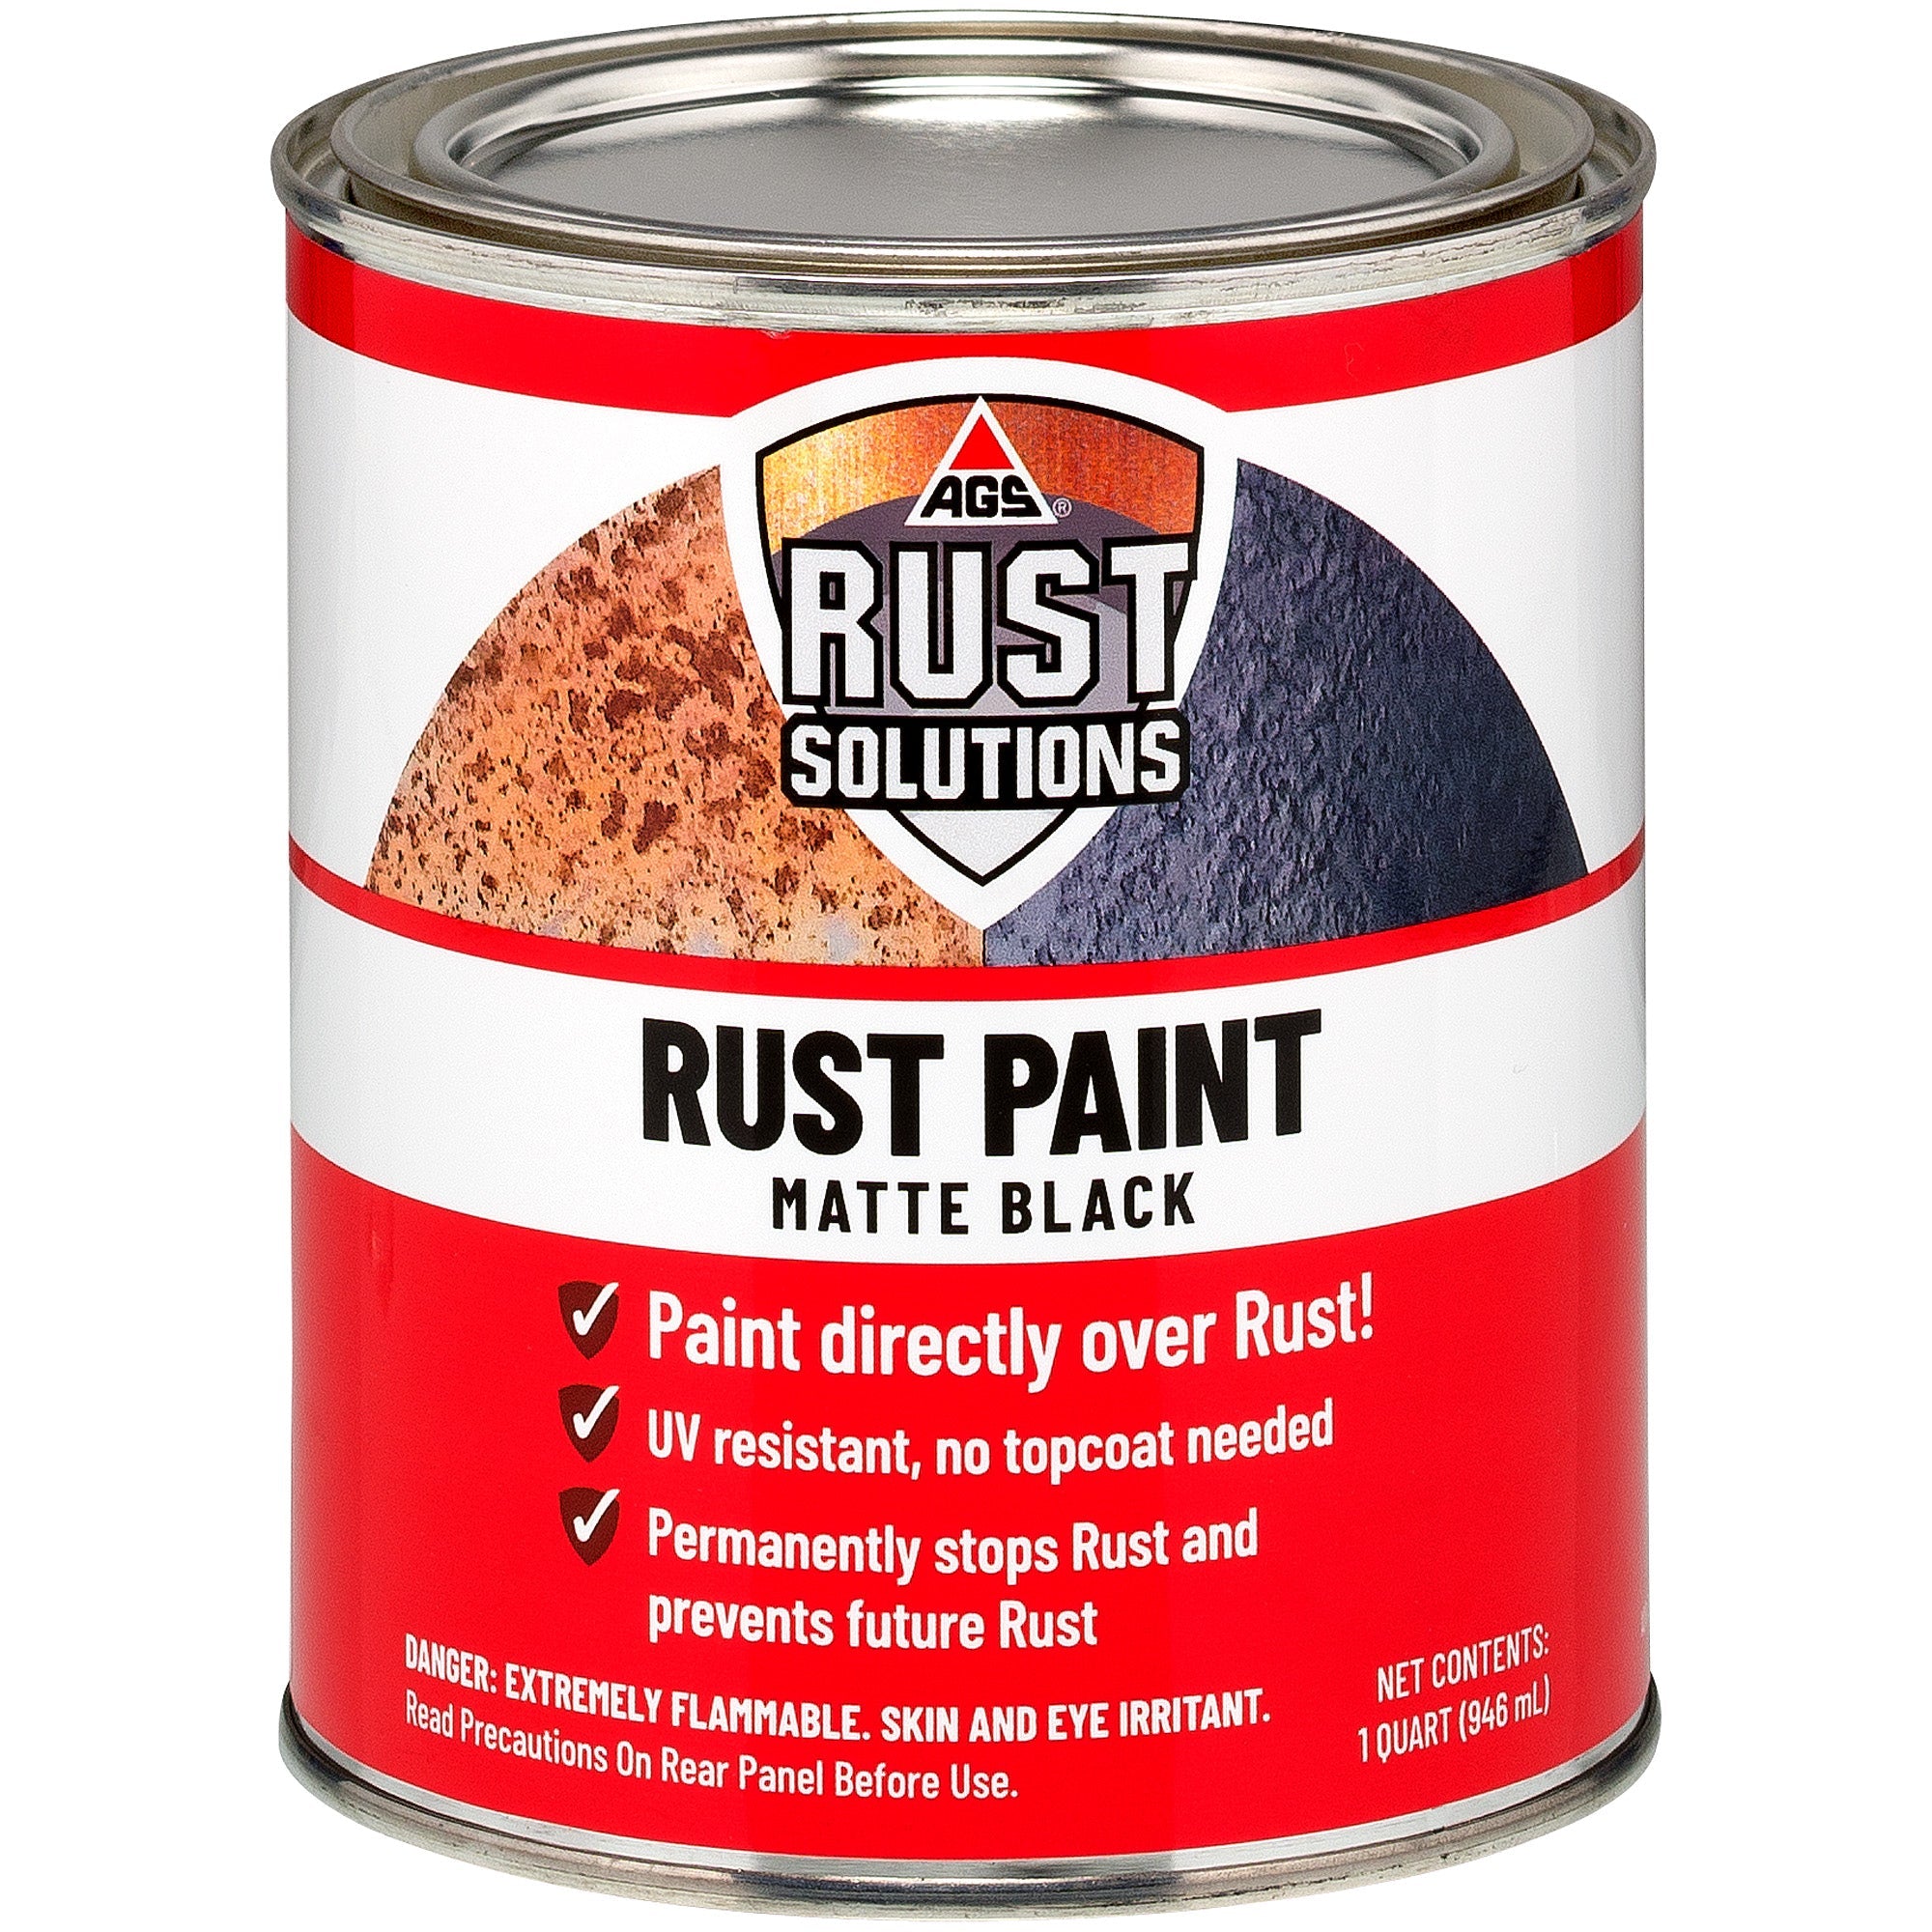 Matte Black Rust Paint - Stop Rust in its Tracks Today! Buy Now